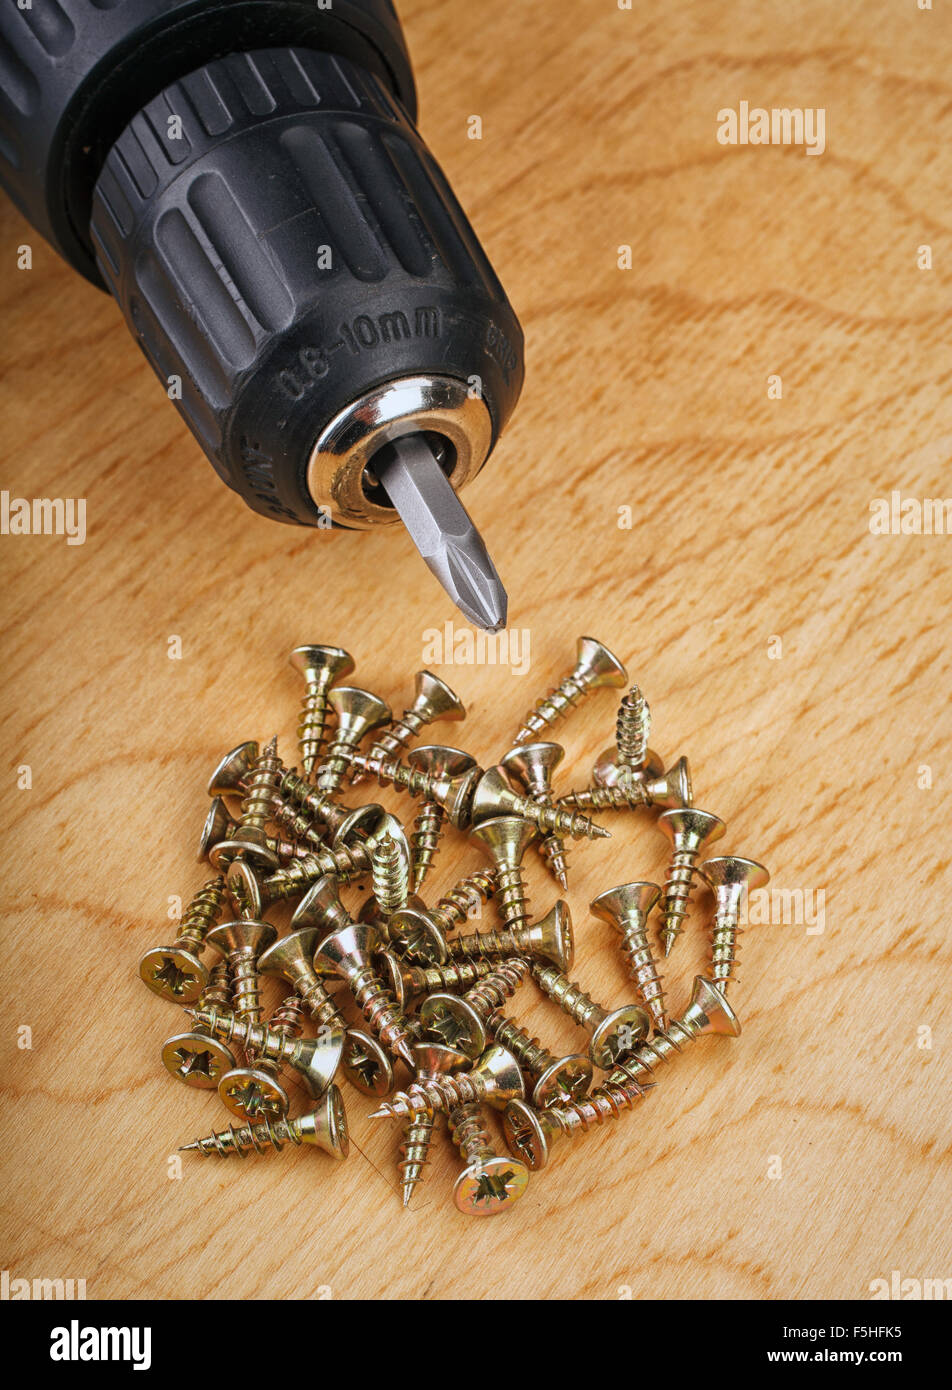 Electric drill and screws Stock Photo